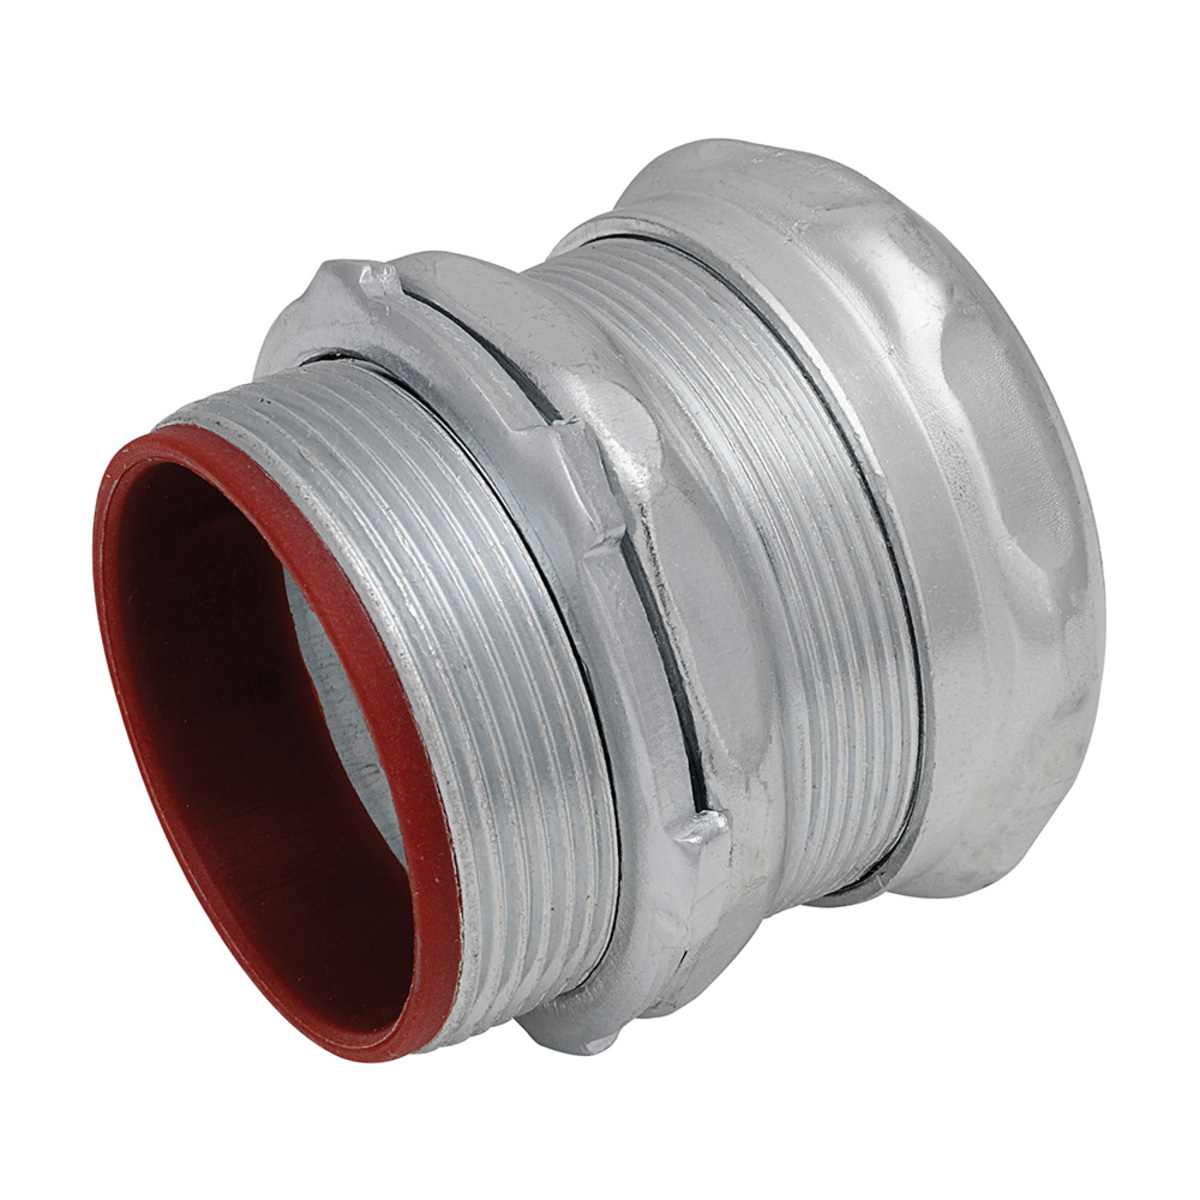 4" EMT Compression Box Connectors, Insulated - Steel